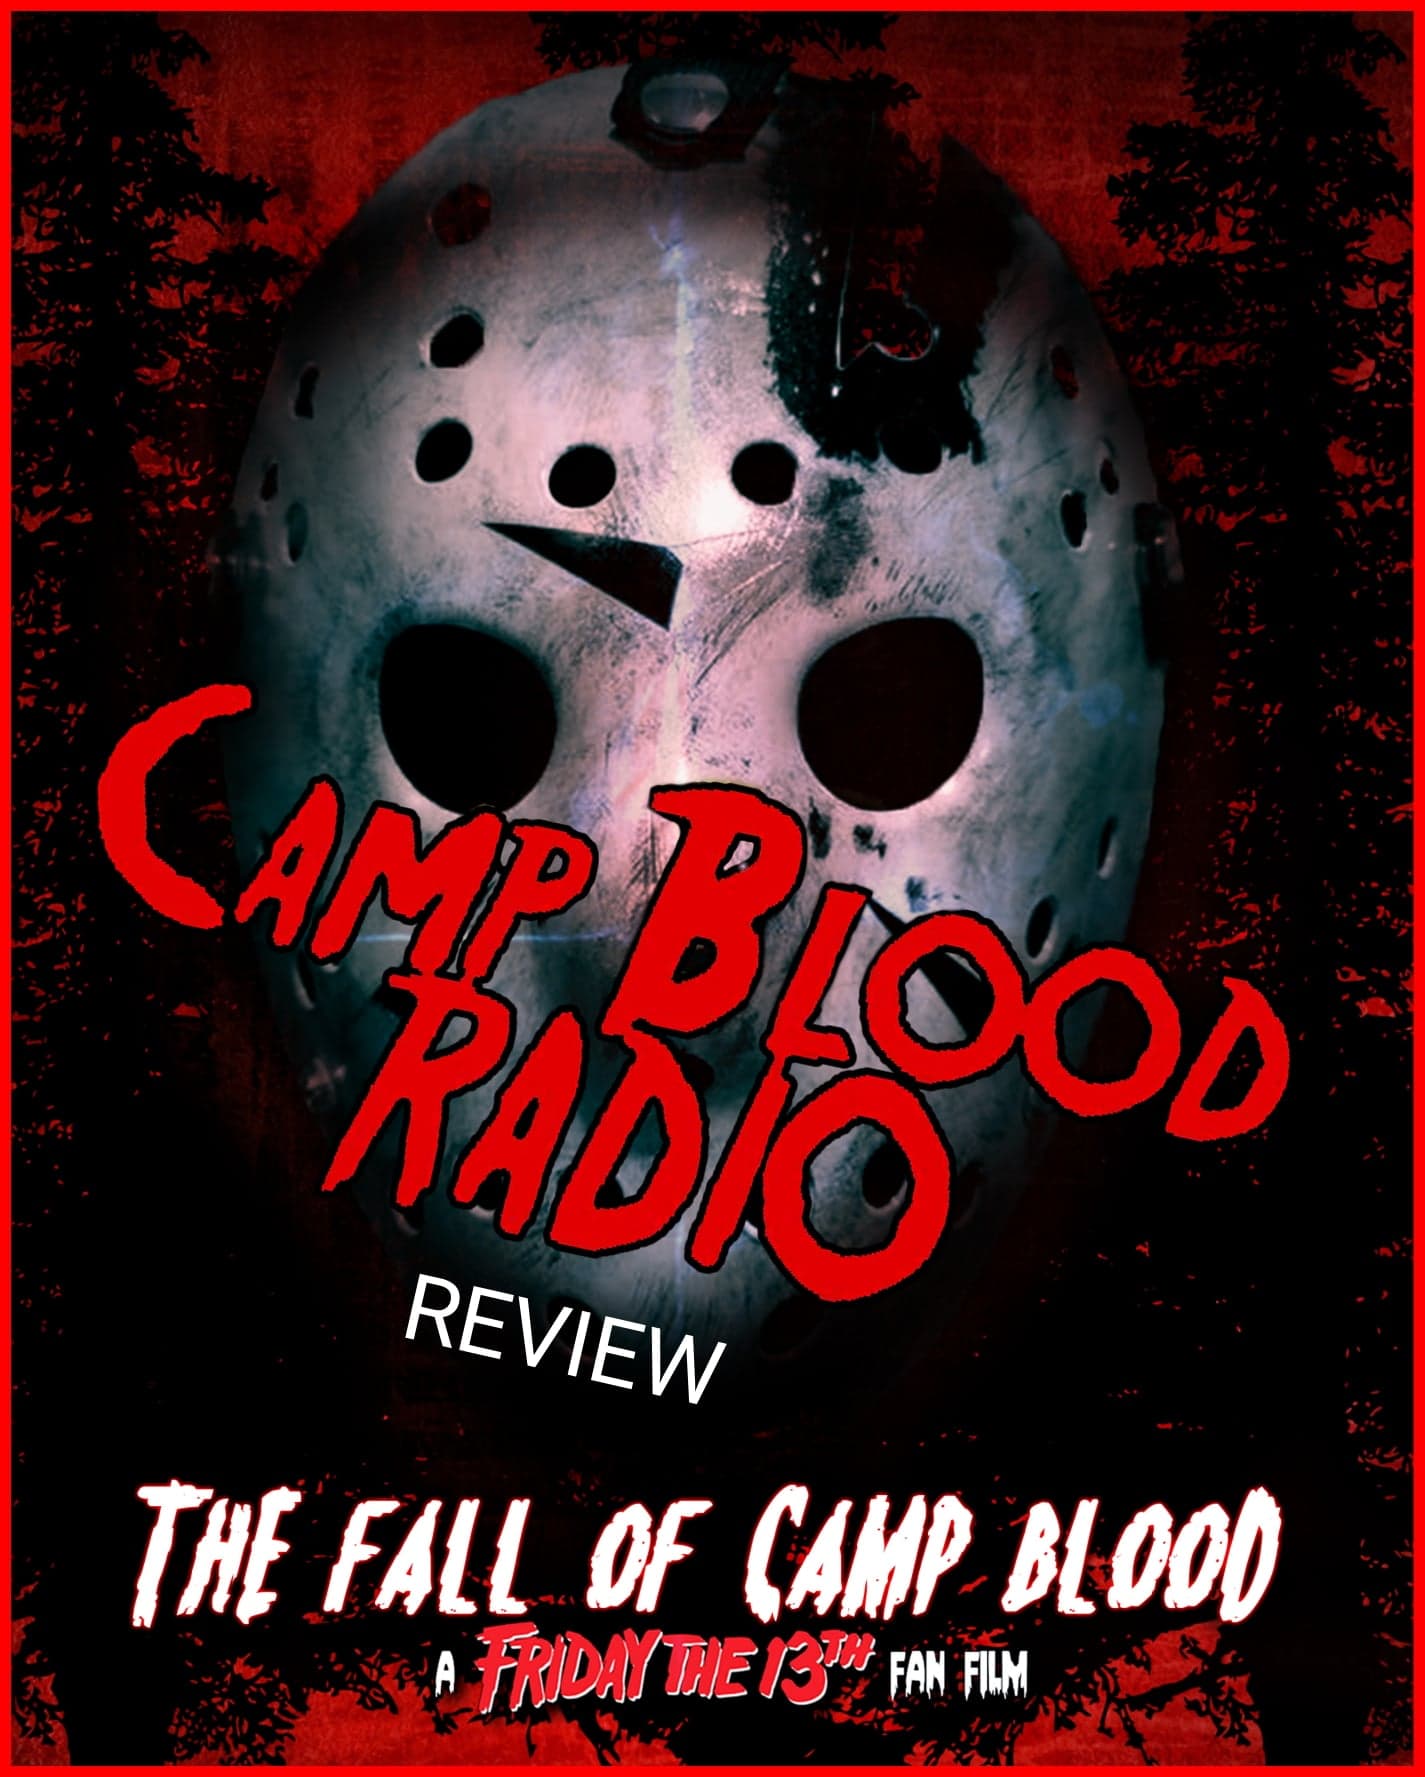 Thoughts on “The Fall of Camp Blood”